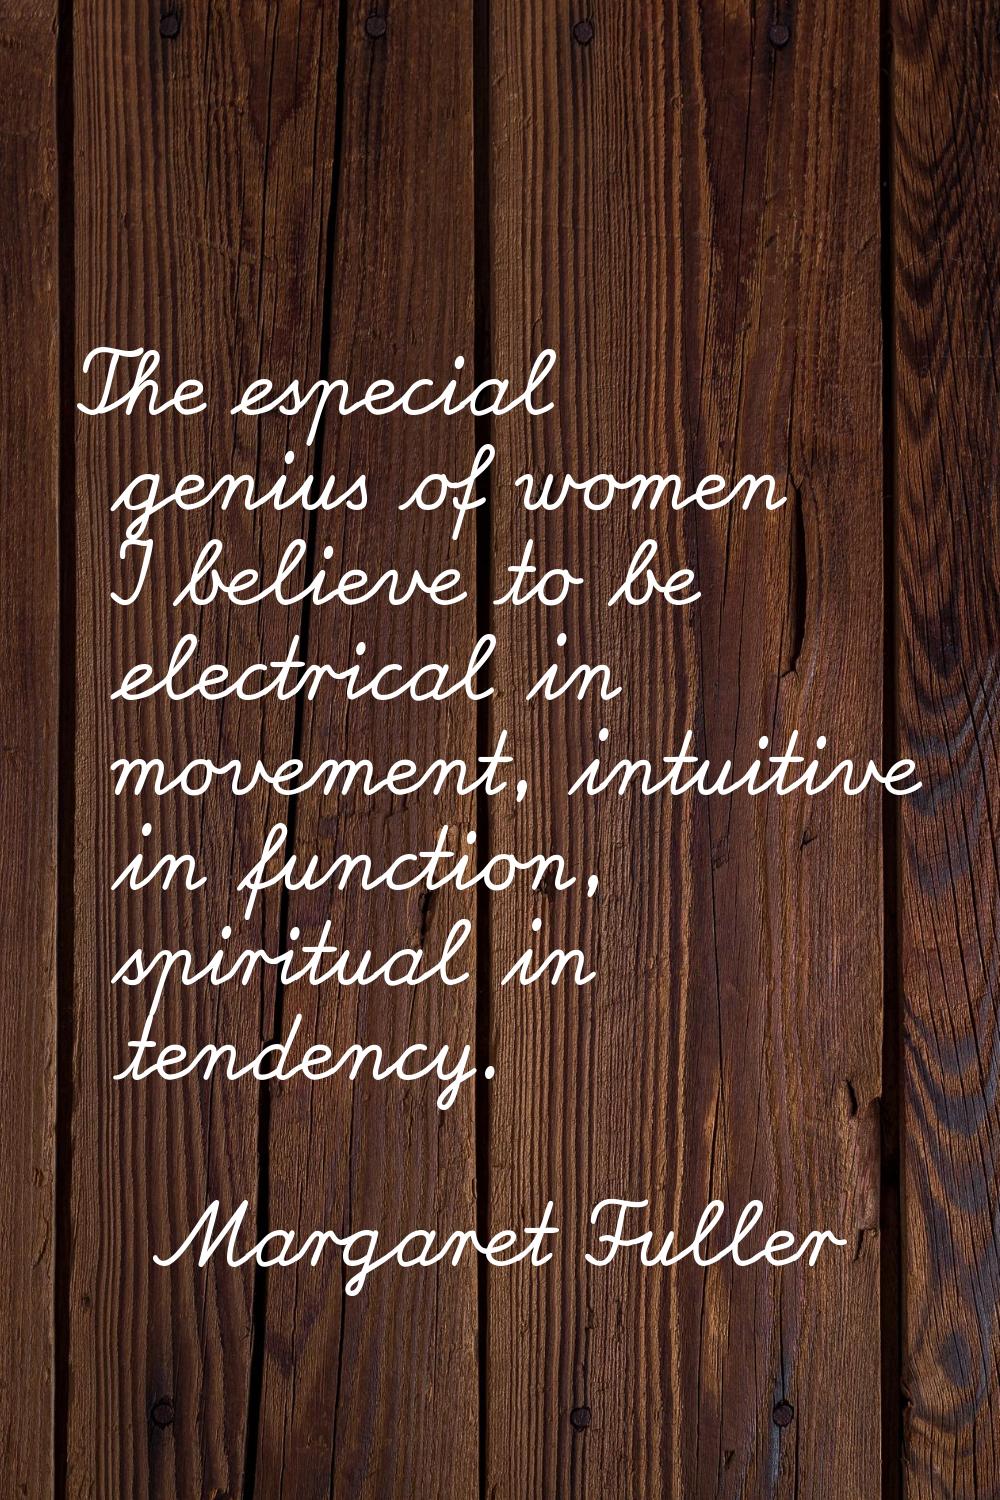 The especial genius of women I believe to be electrical in movement, intuitive in function, spiritu